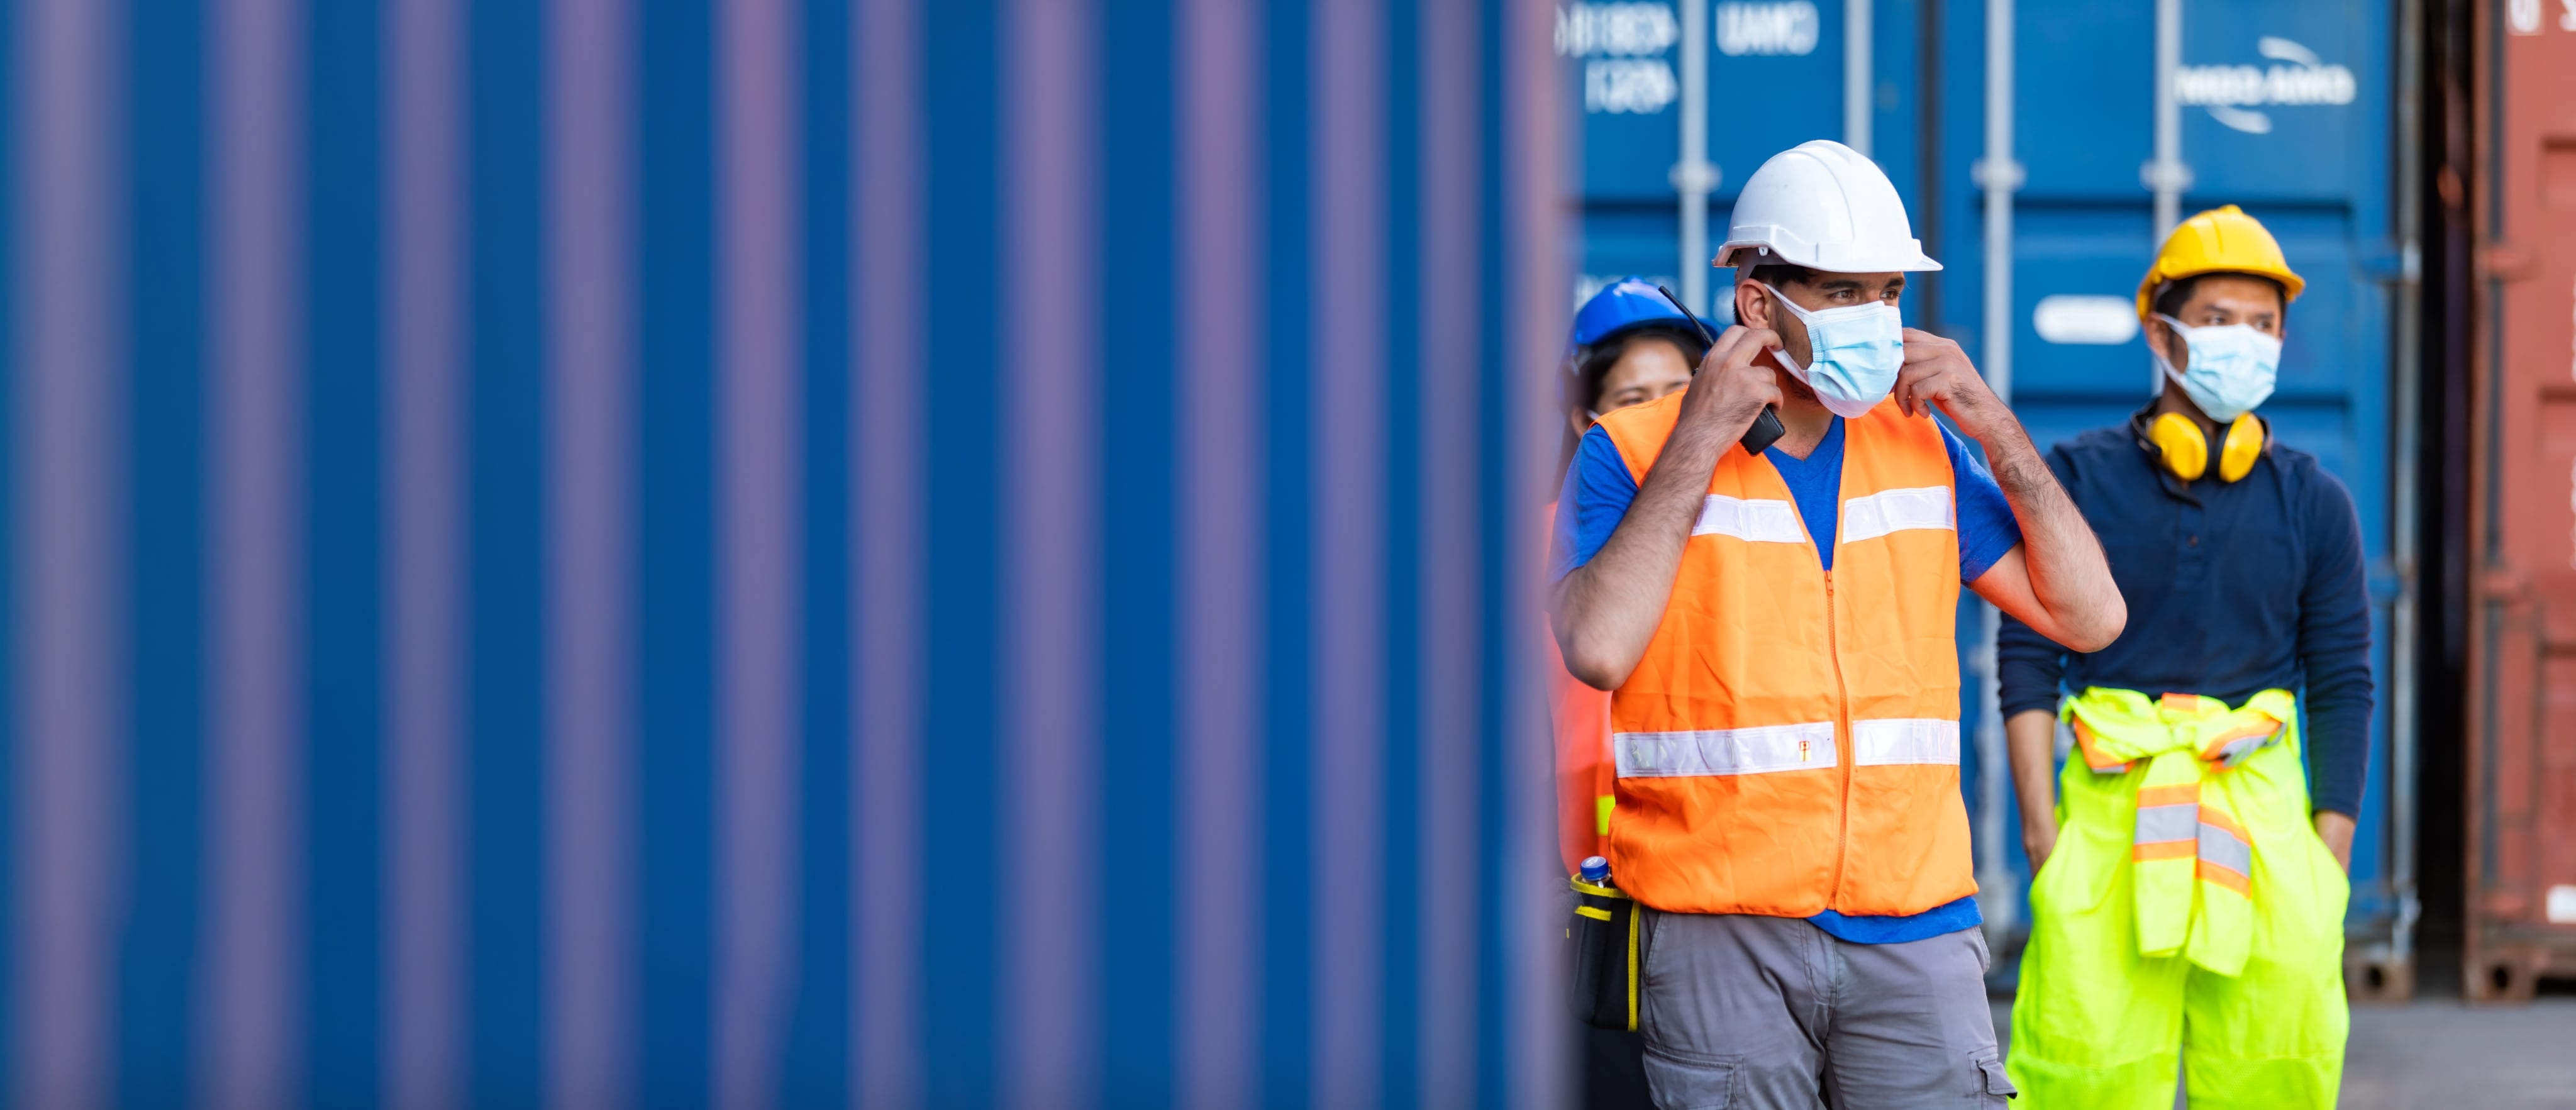 Two male workers and one female worker are wearing masks and hard hats. They are surrounded by shipping containers outside.